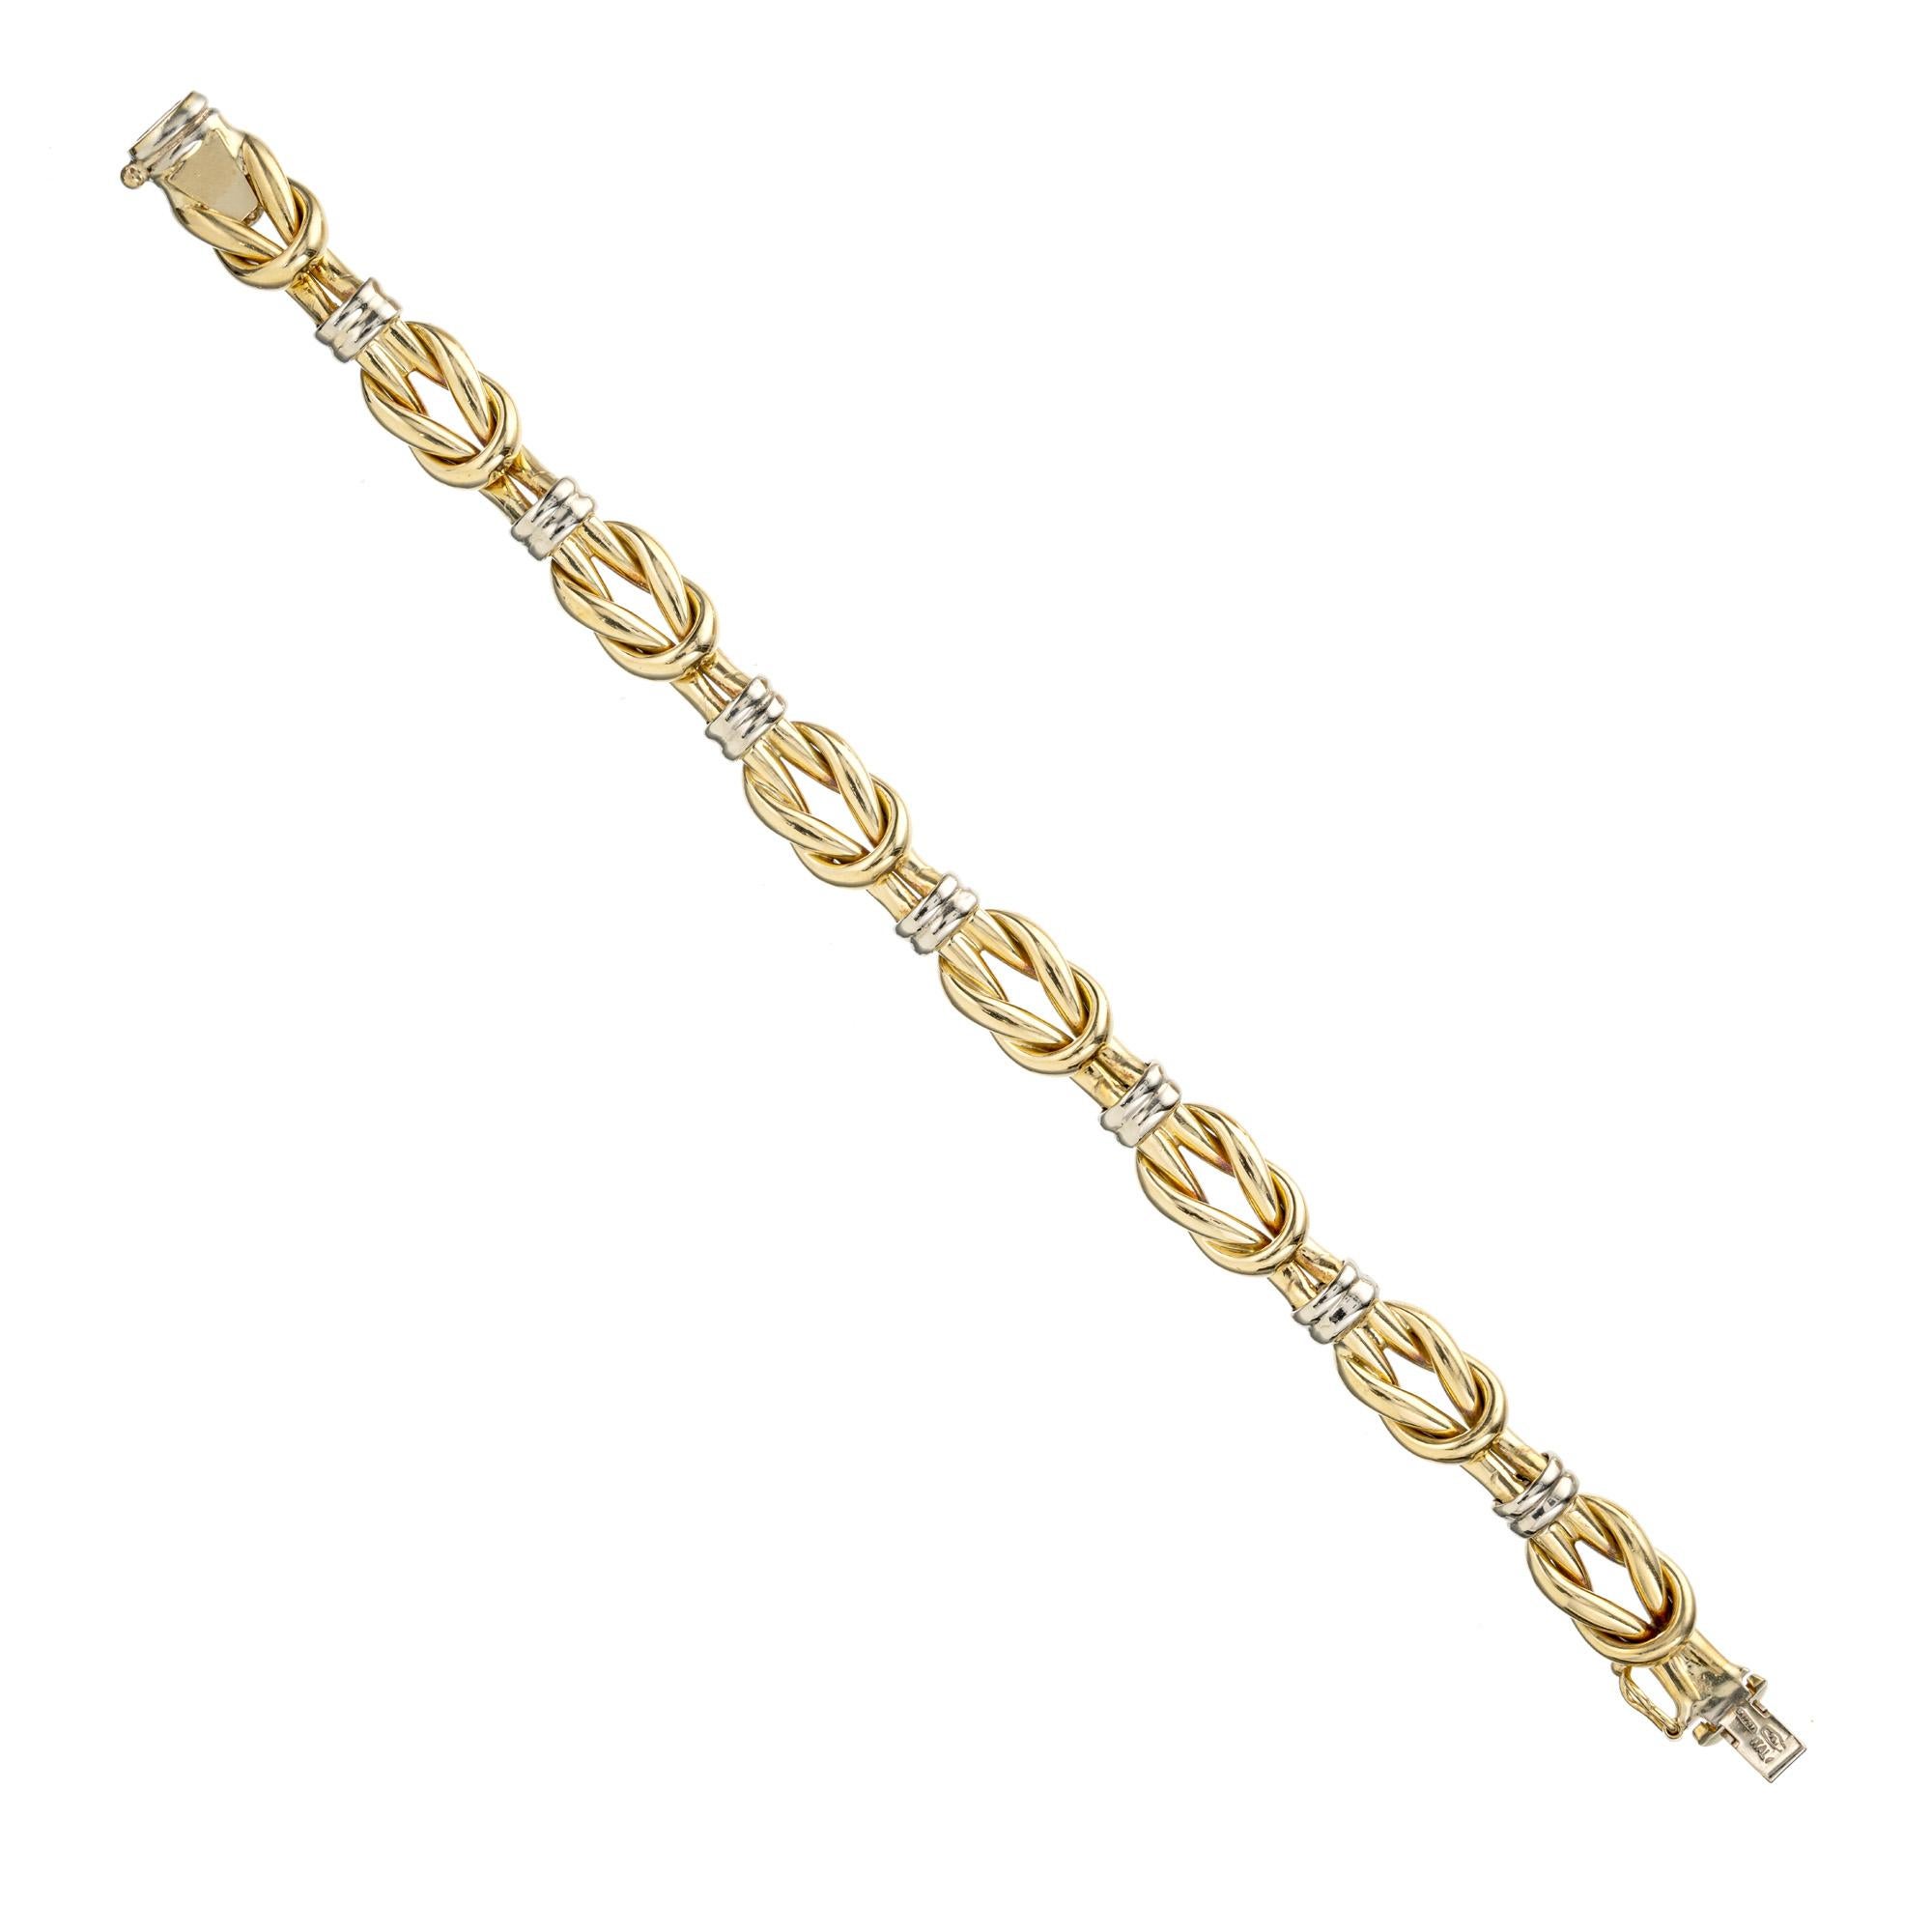 This Two Tone Yellow White Gold Italian Knot Bracelet that effortlessly combines elegance and contemporary style. This bracelet features a unique design of intertwining 18k yellow and white gold knots. Measures at 7.25 inches. Secure clasp with a